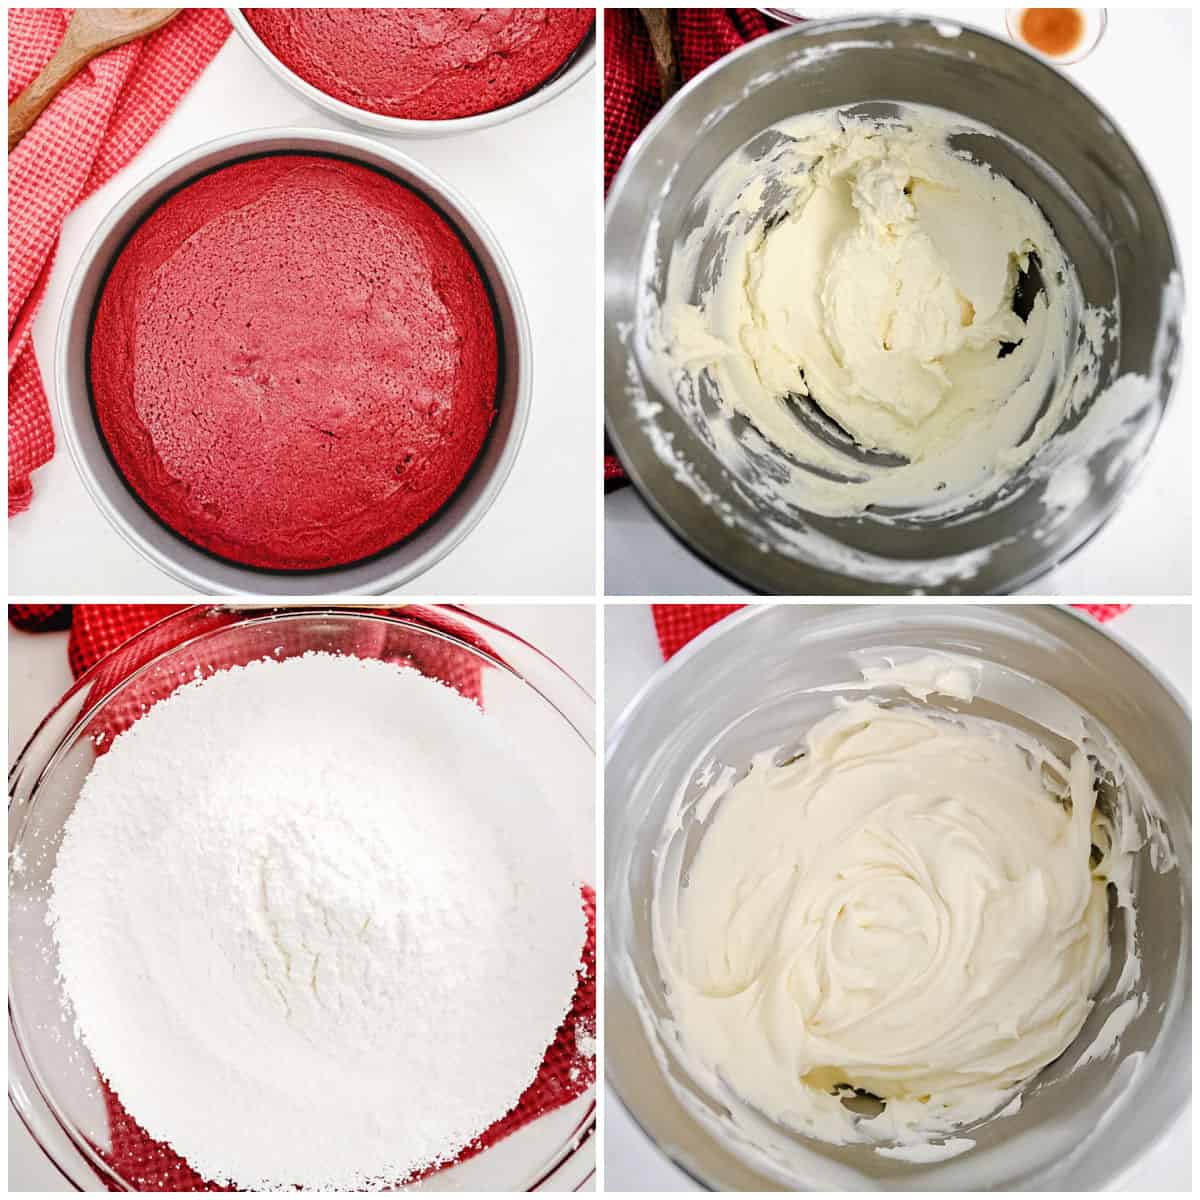 Collage image of stages of red velvet icing preparation.